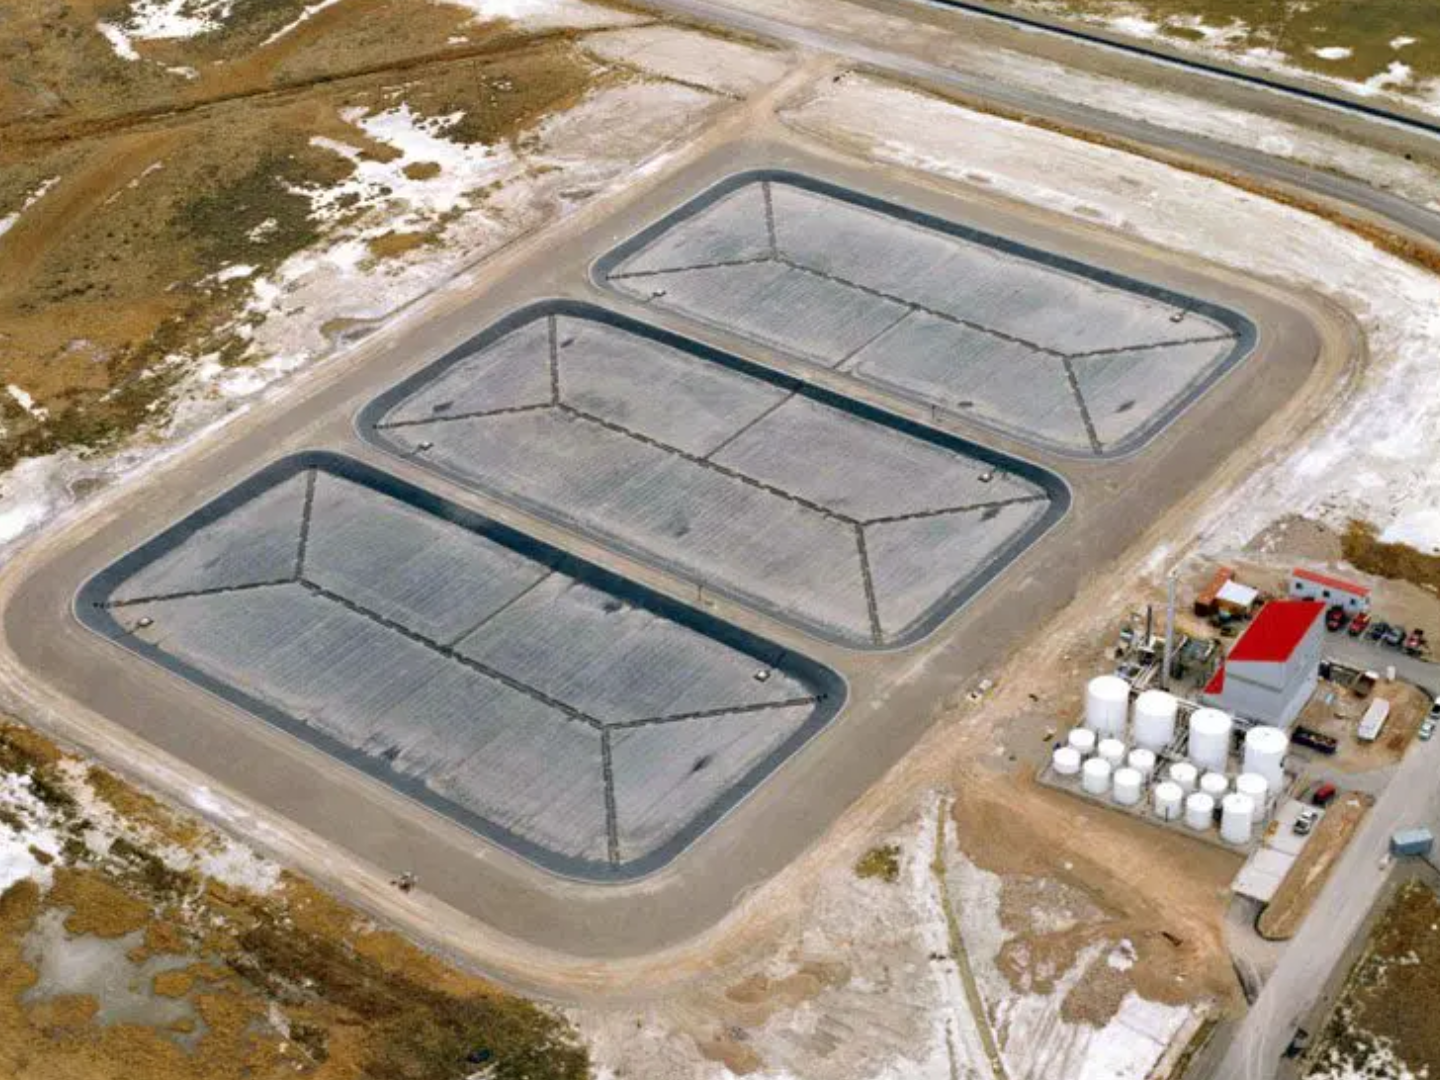 A large concrete area with three large tanks.